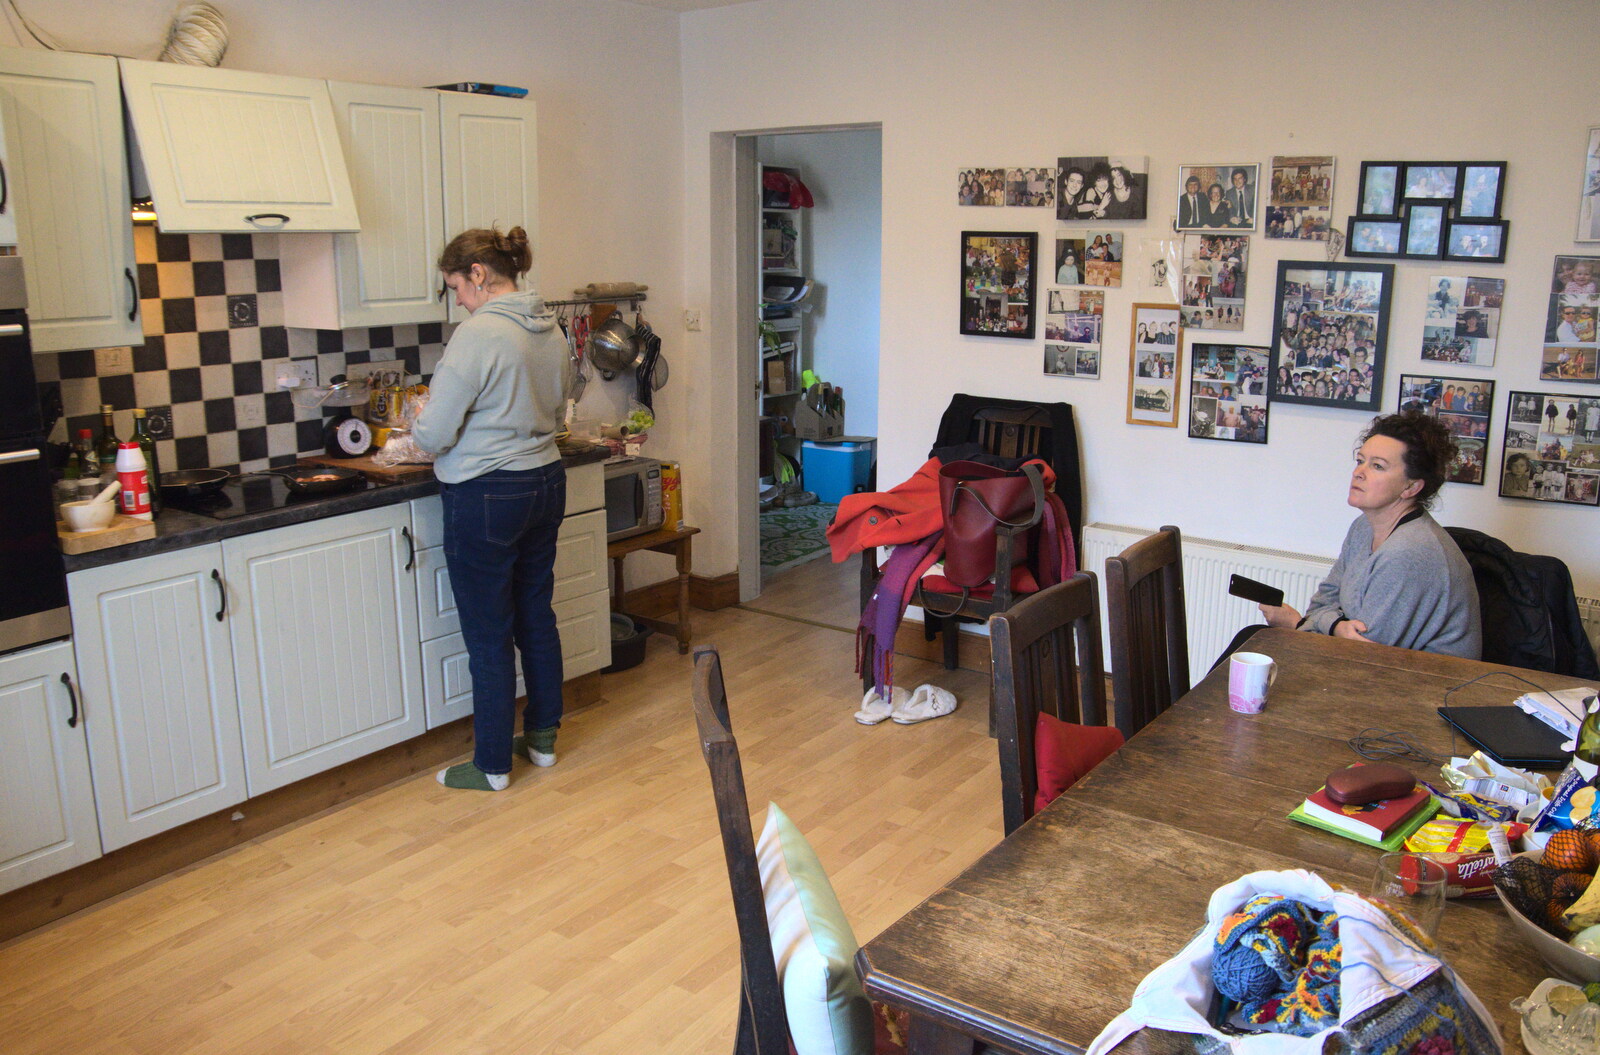 The Dead Zoo, Dublin, Ireland - 17th February 2023: Isobel and Evelyn in the kitchen